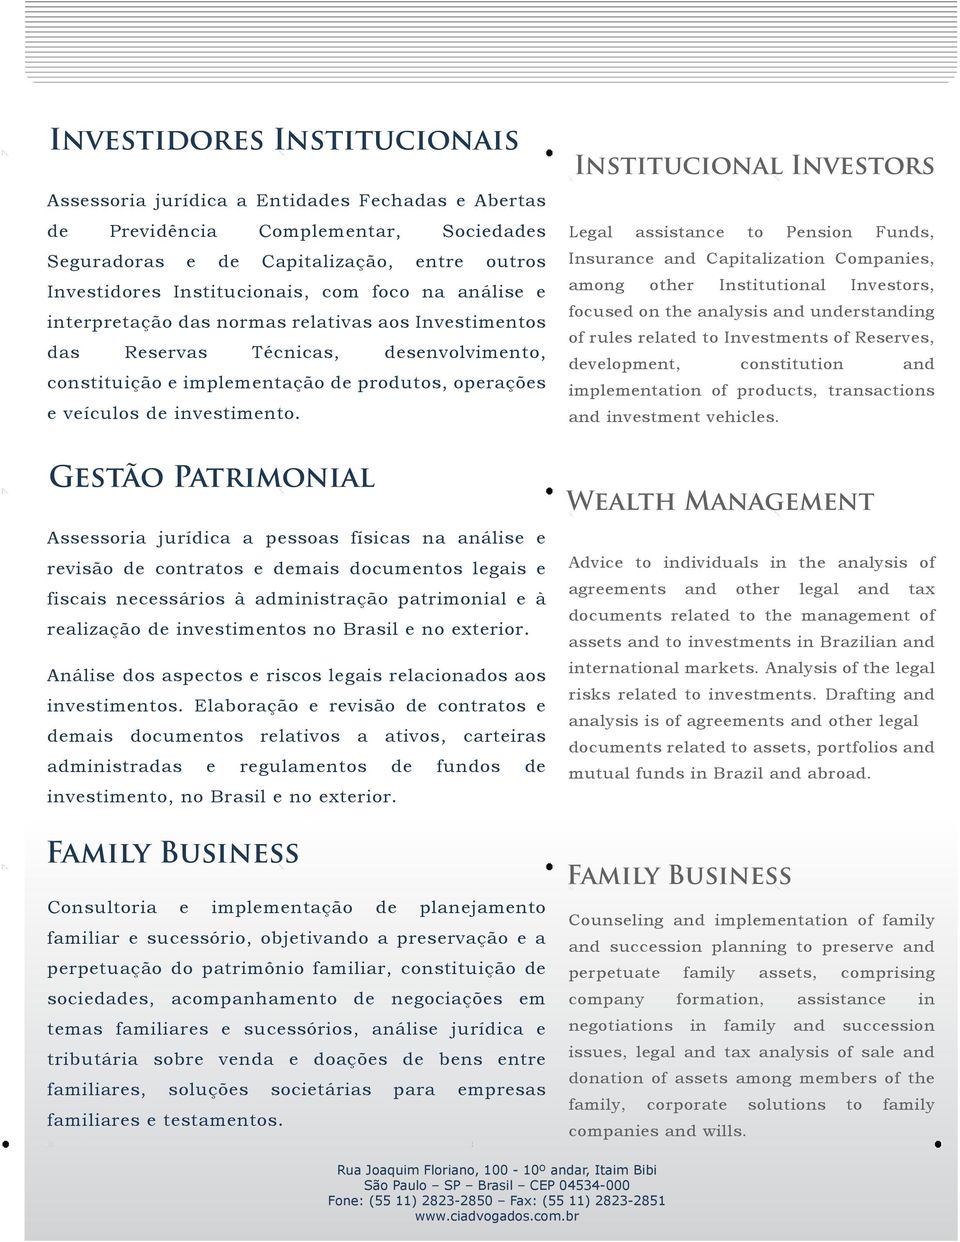 Institucional Investors Legal assistance to Pension Funds, Insurance and Capitalization Companies, among other Institutional Investors, focused on the analysis and understanding of rules related to